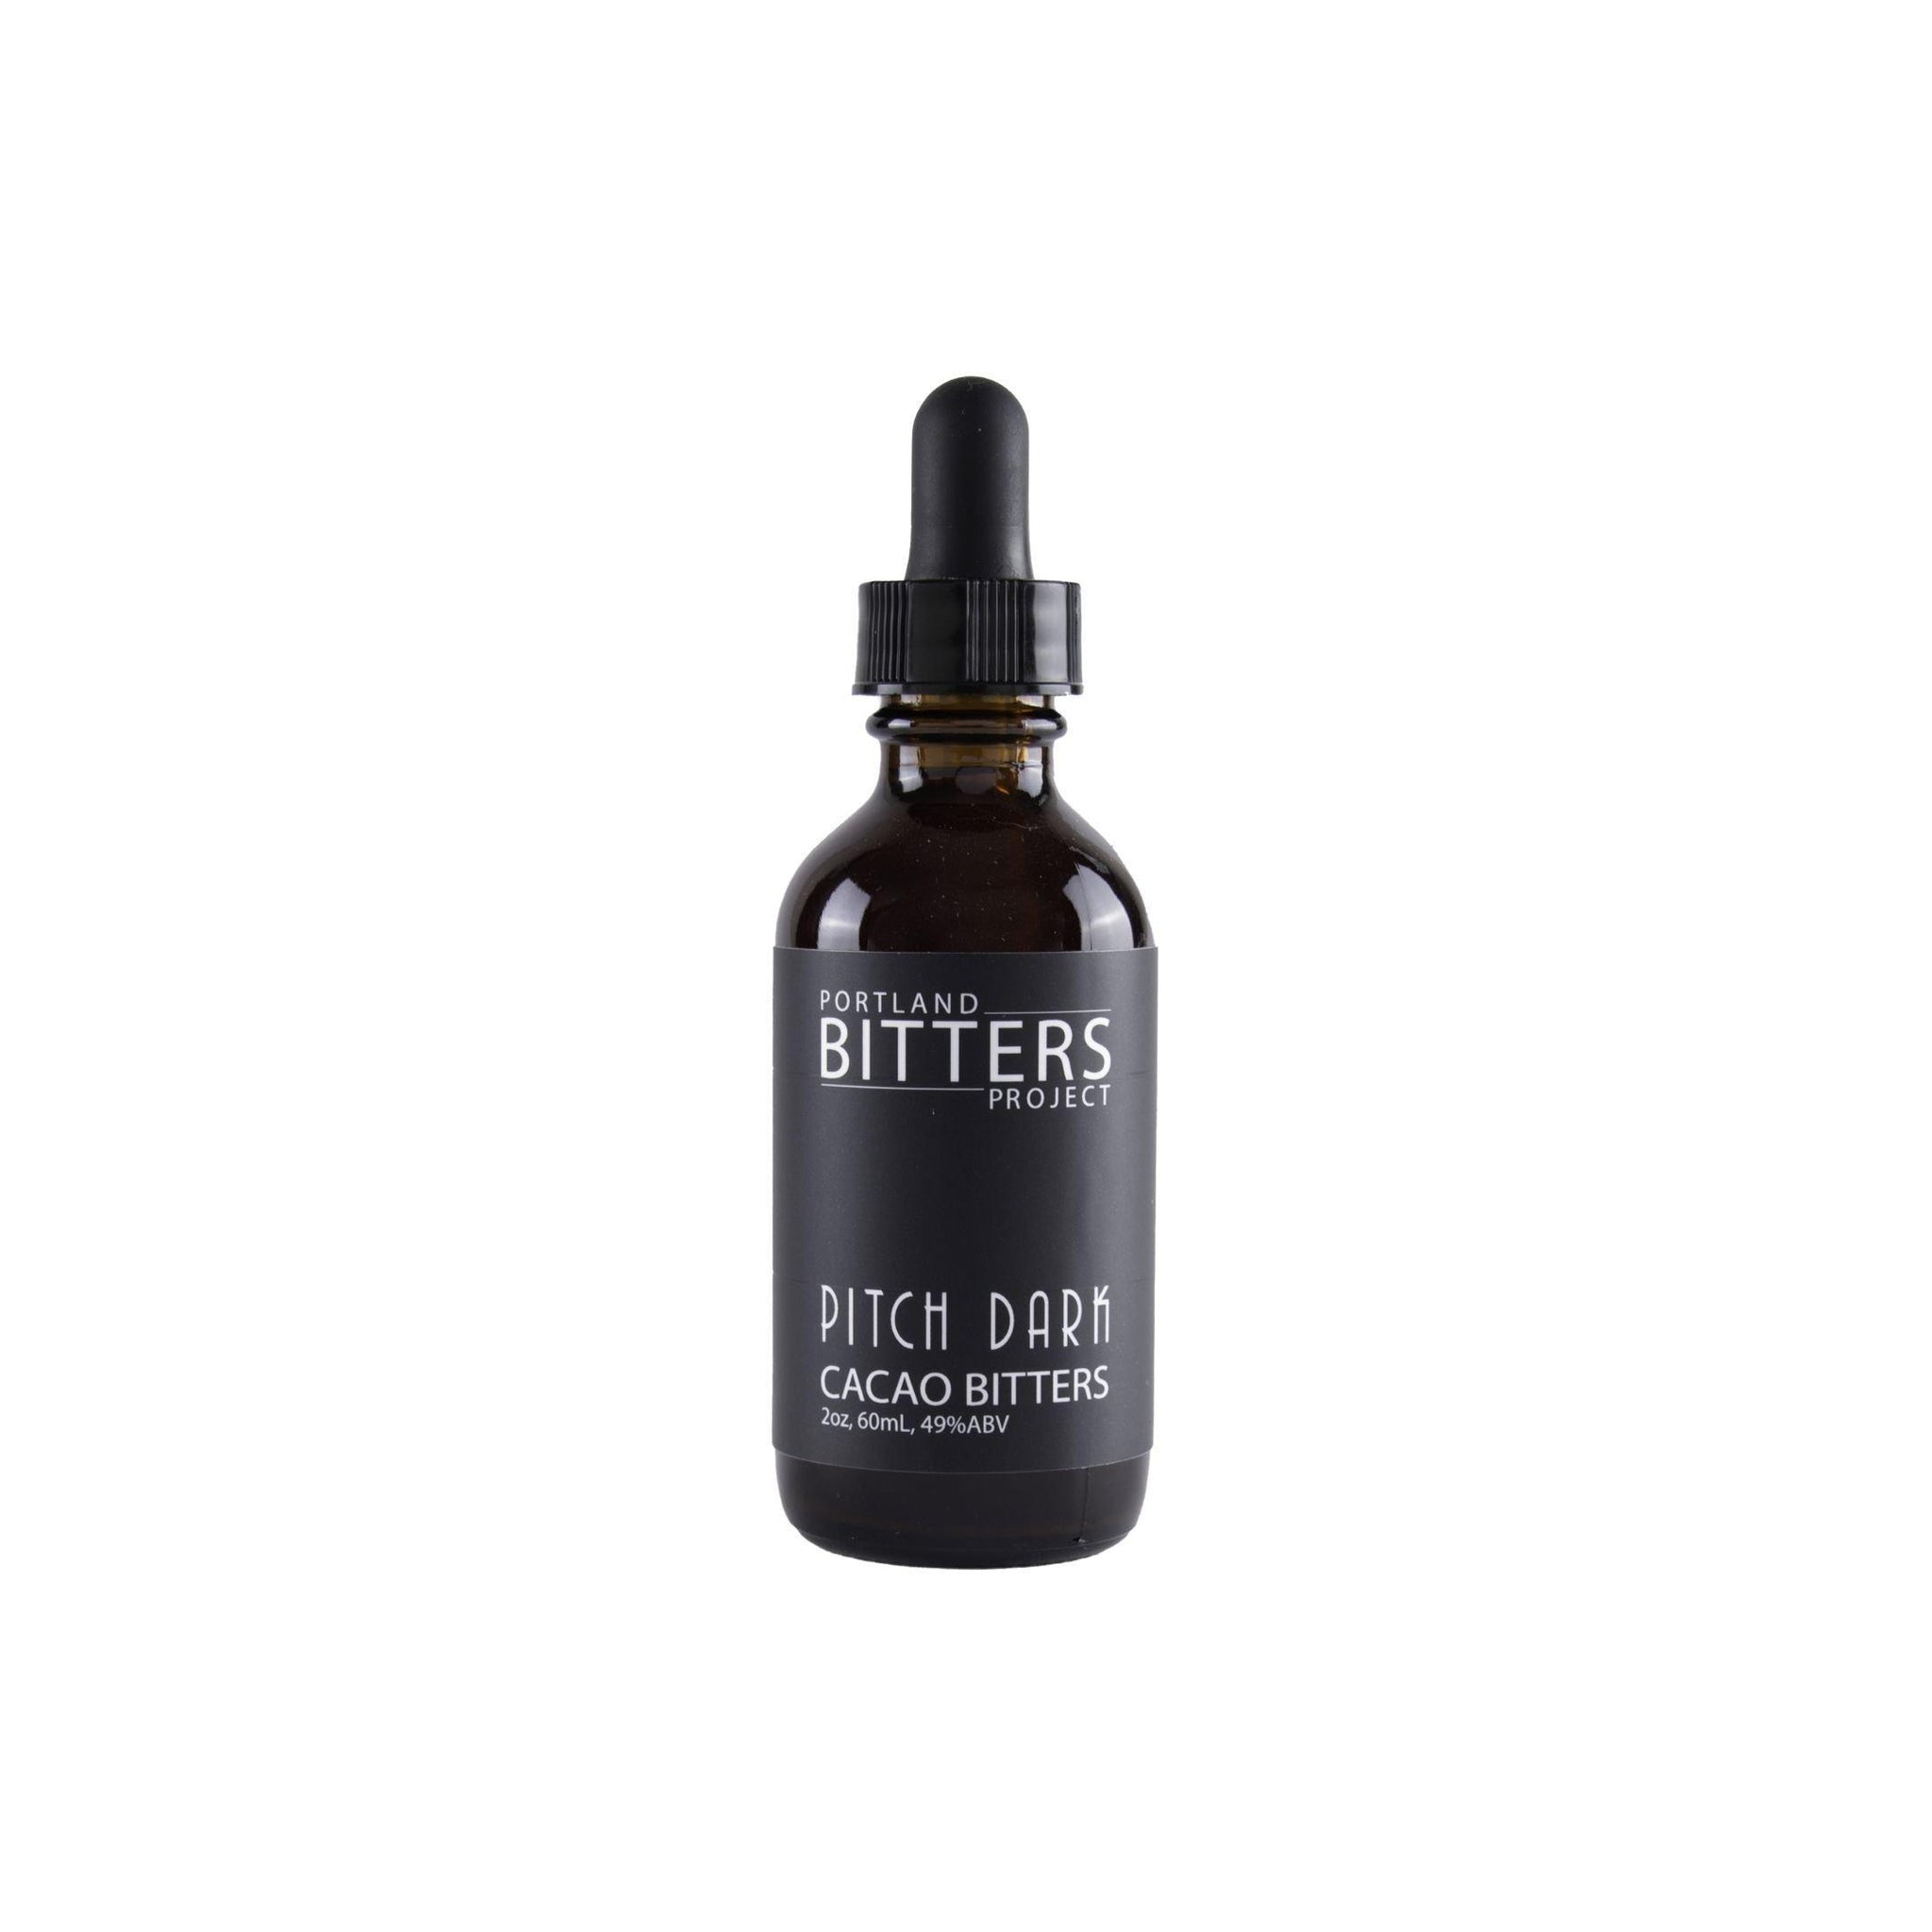 Portland Bitters Project Pitch Dark Cacao Bitters 2oz